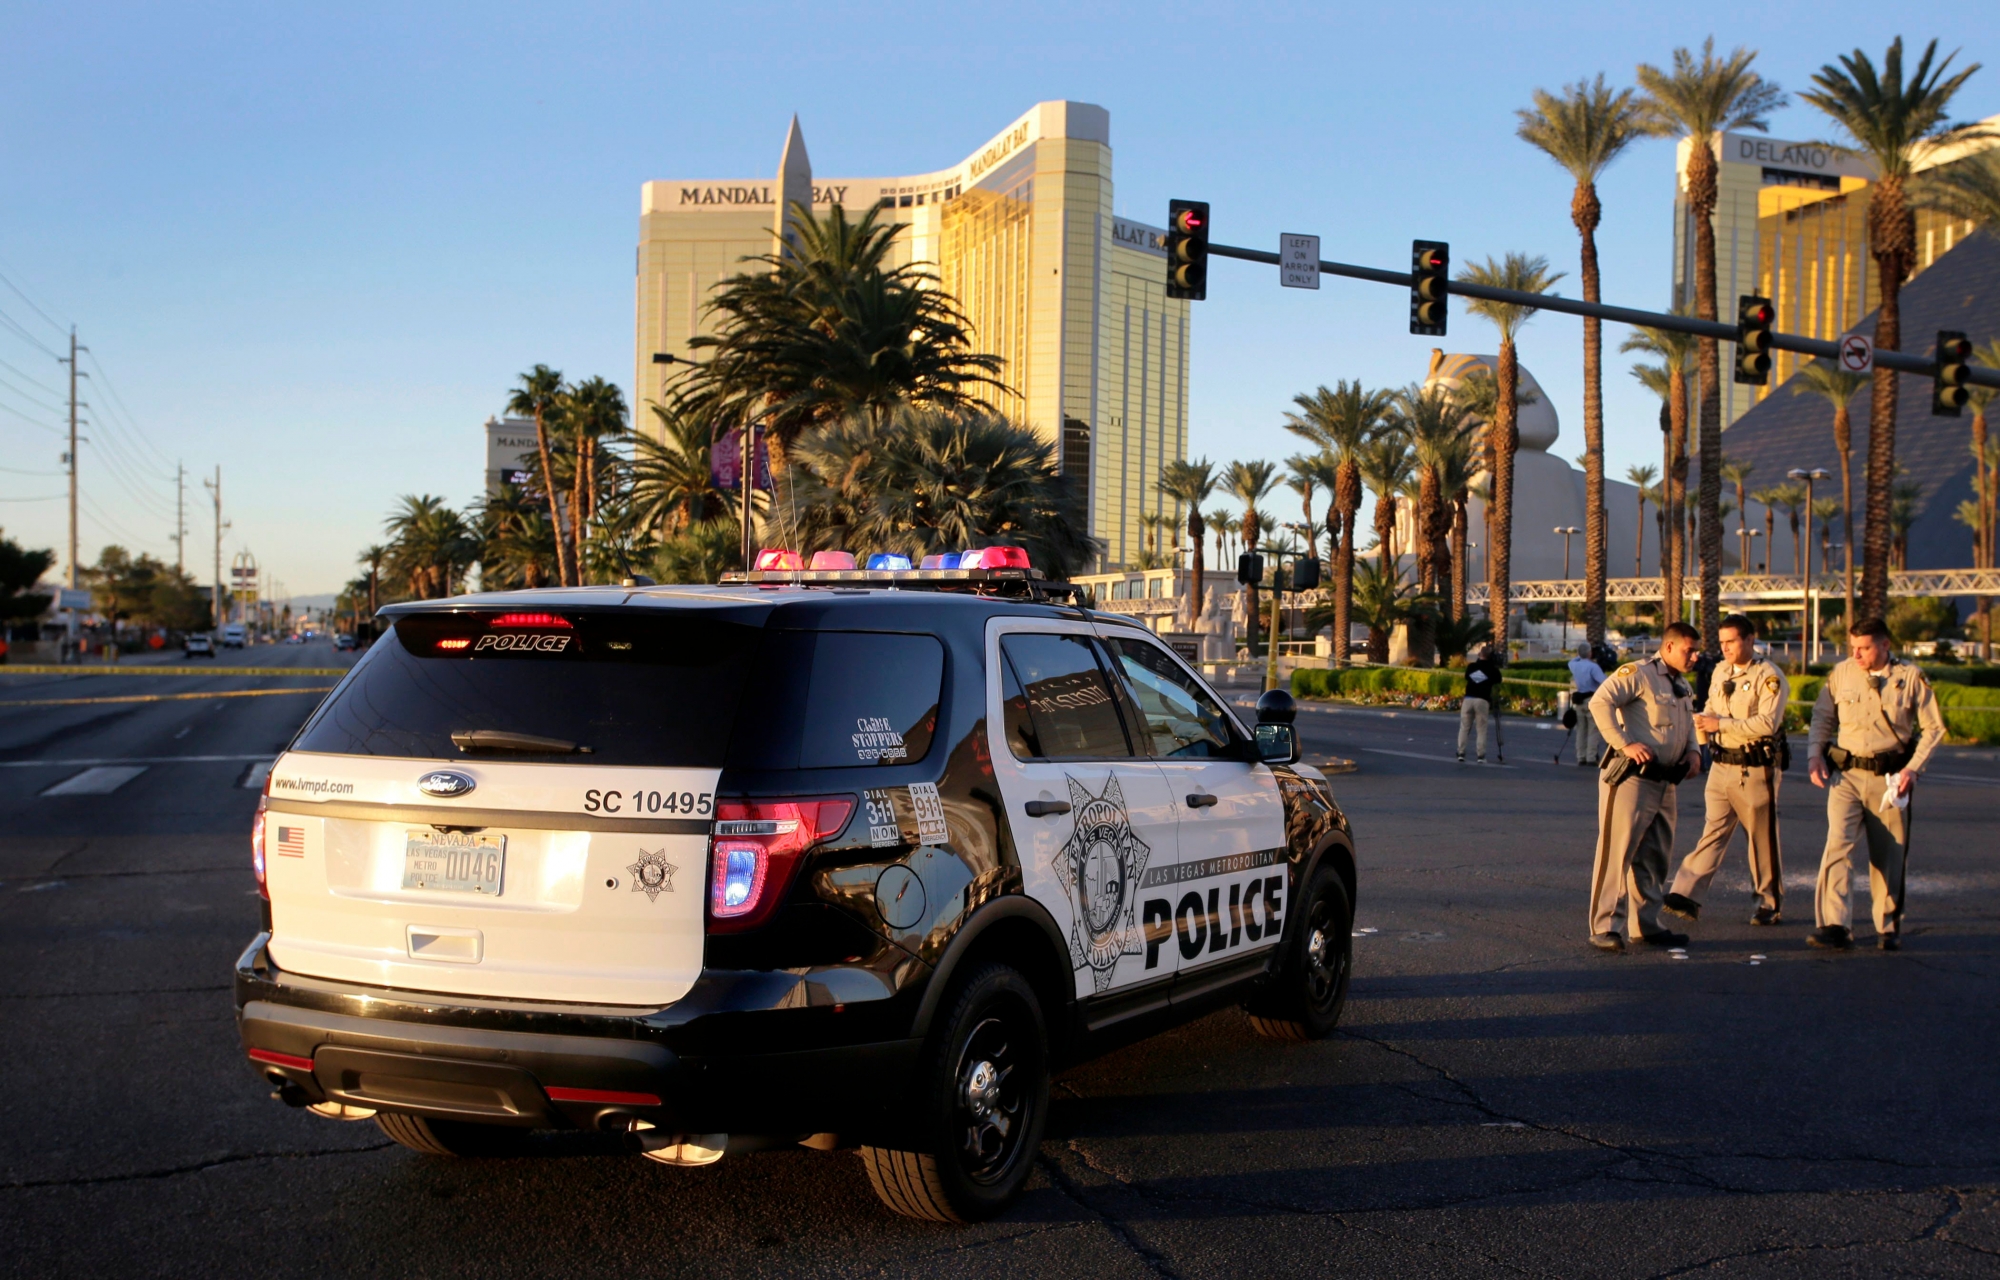 epa06242252 Police officers block Las Vegas Boulevard in front of the Mandalay Bay Hotel and Casino where a gunman fired from during the Route 91 Harvest festival on Las Vegas Boulevard in Las Vegas, Nevada, USA, 03 October 2017. Police reports indicate that a gunman, identified as Stephen Paddock, 64, firing from an upper floor in the Mandalay Bay hotel killed more than 50 people and injured more than 500 before he reportedly killed himself as police made their way to his hotel room.  EPA/PAUL BUCK USA LAS VEGAS SHOOTING